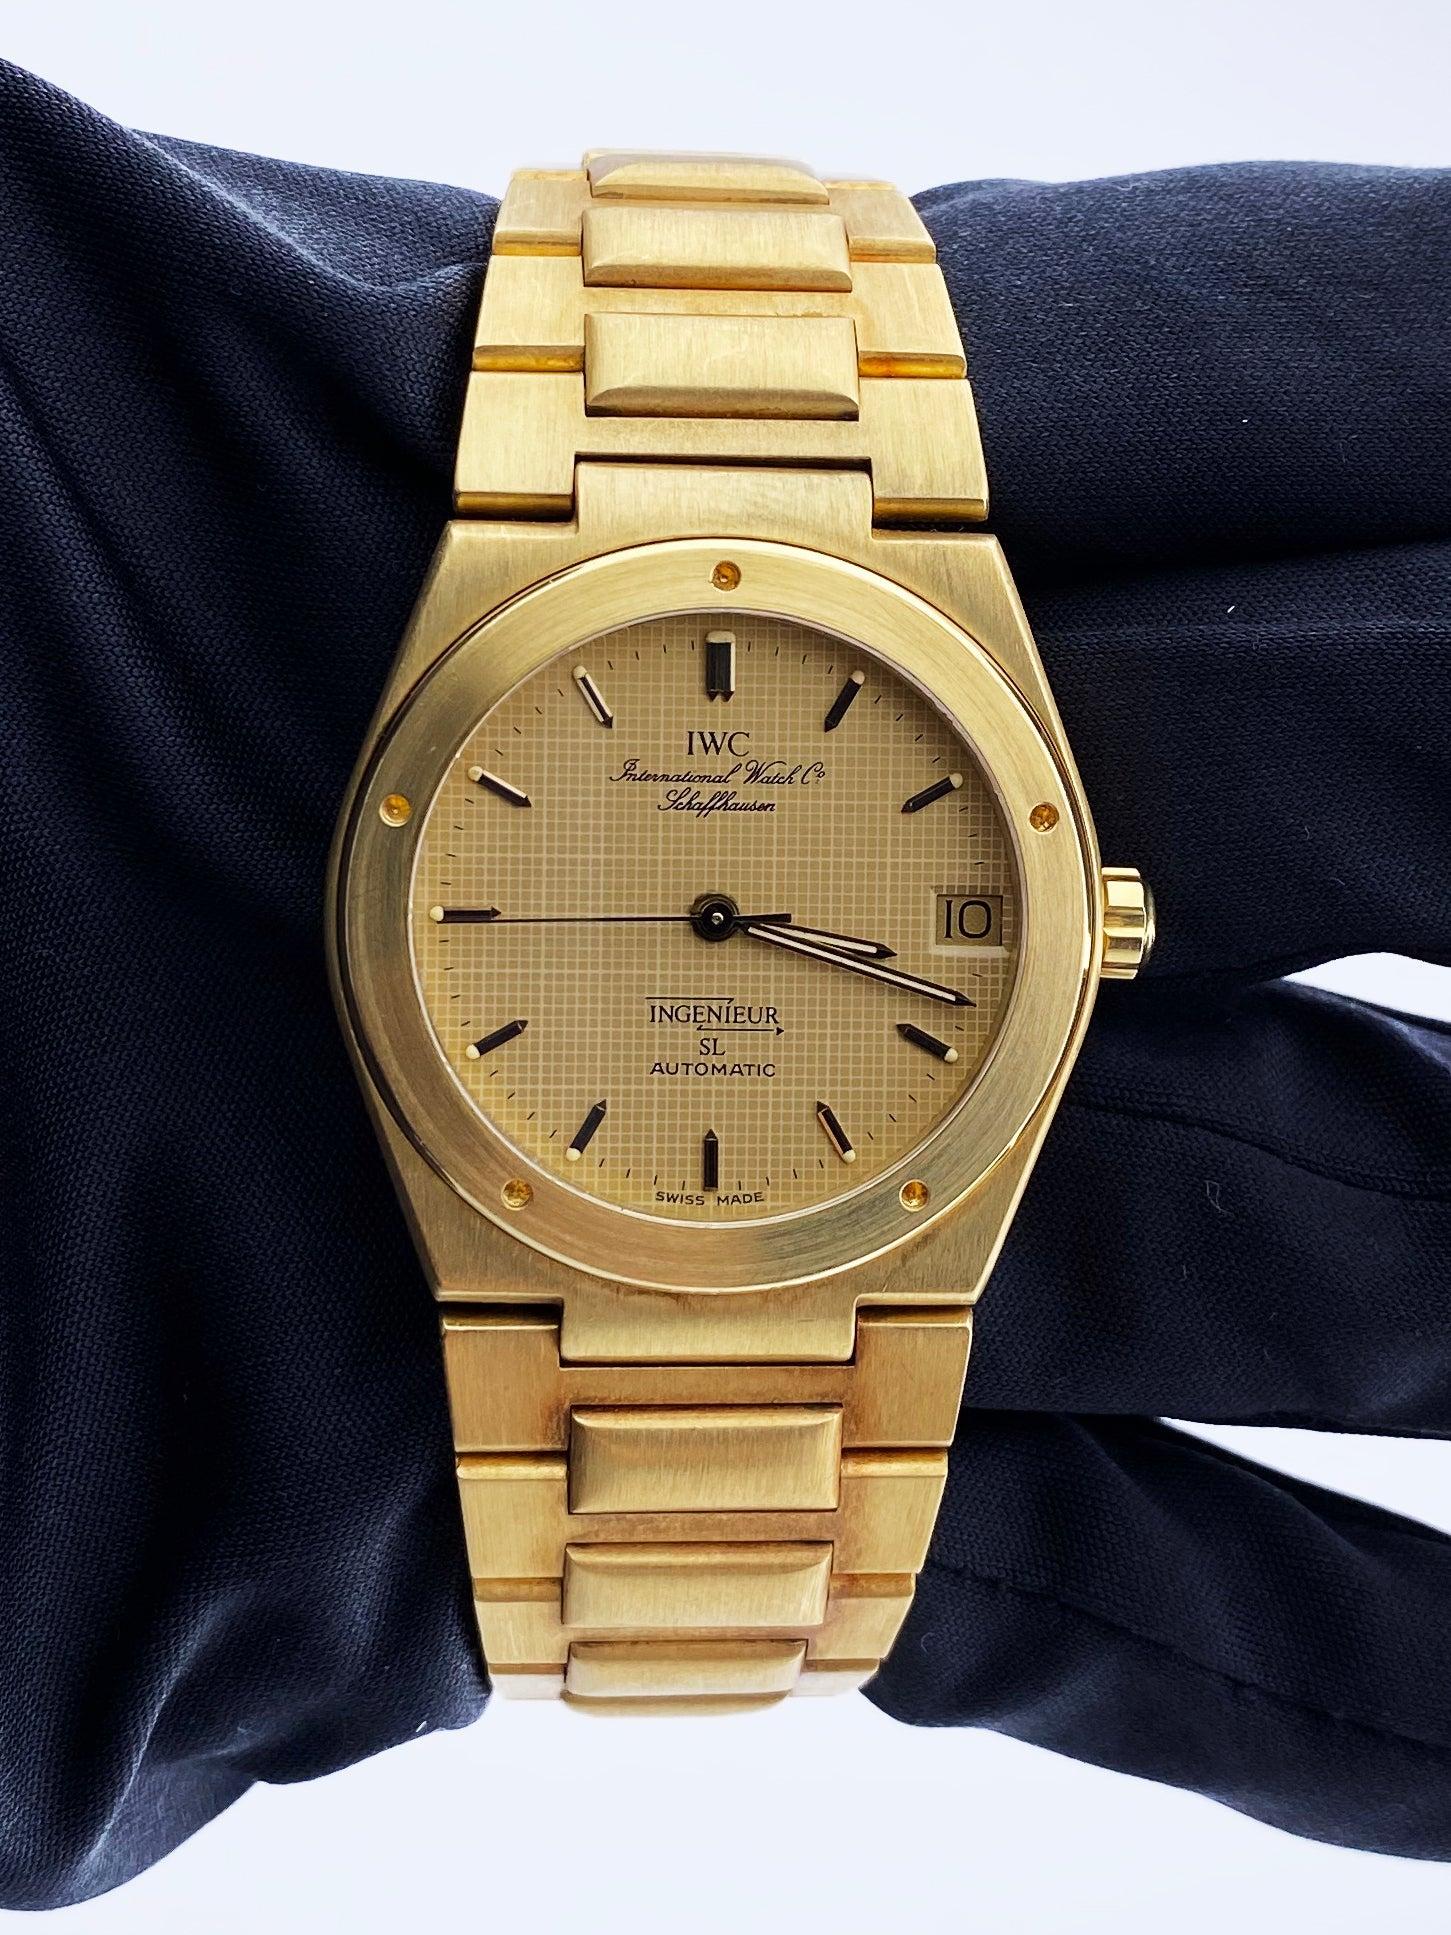 IWC Ingenieur 9230 Mens Watch. 34mm 18k yellow gold case. 18k yellow gold bezel. Champagne dial with luminous gold hands and index hour markers. Minute markers on the outer dial. Date display at the 3 o'clock position. 18k yellow gold bracelet with